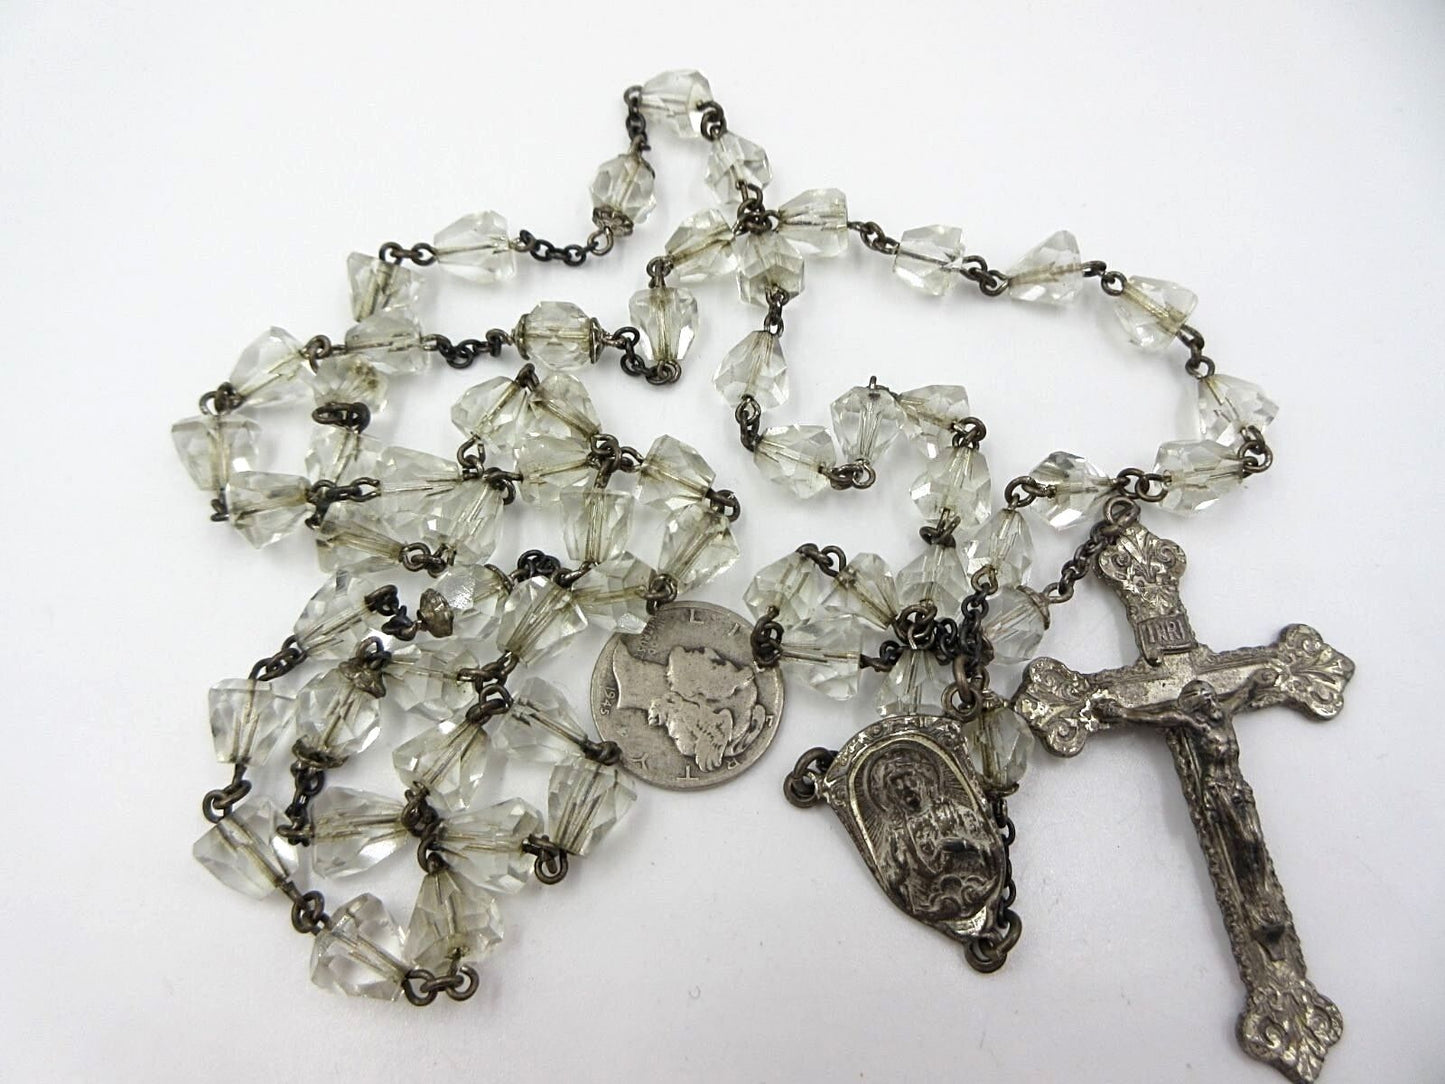 Catamore Sterling Silver Religious Catholic Faceted Crystal Glass Bead Rosary